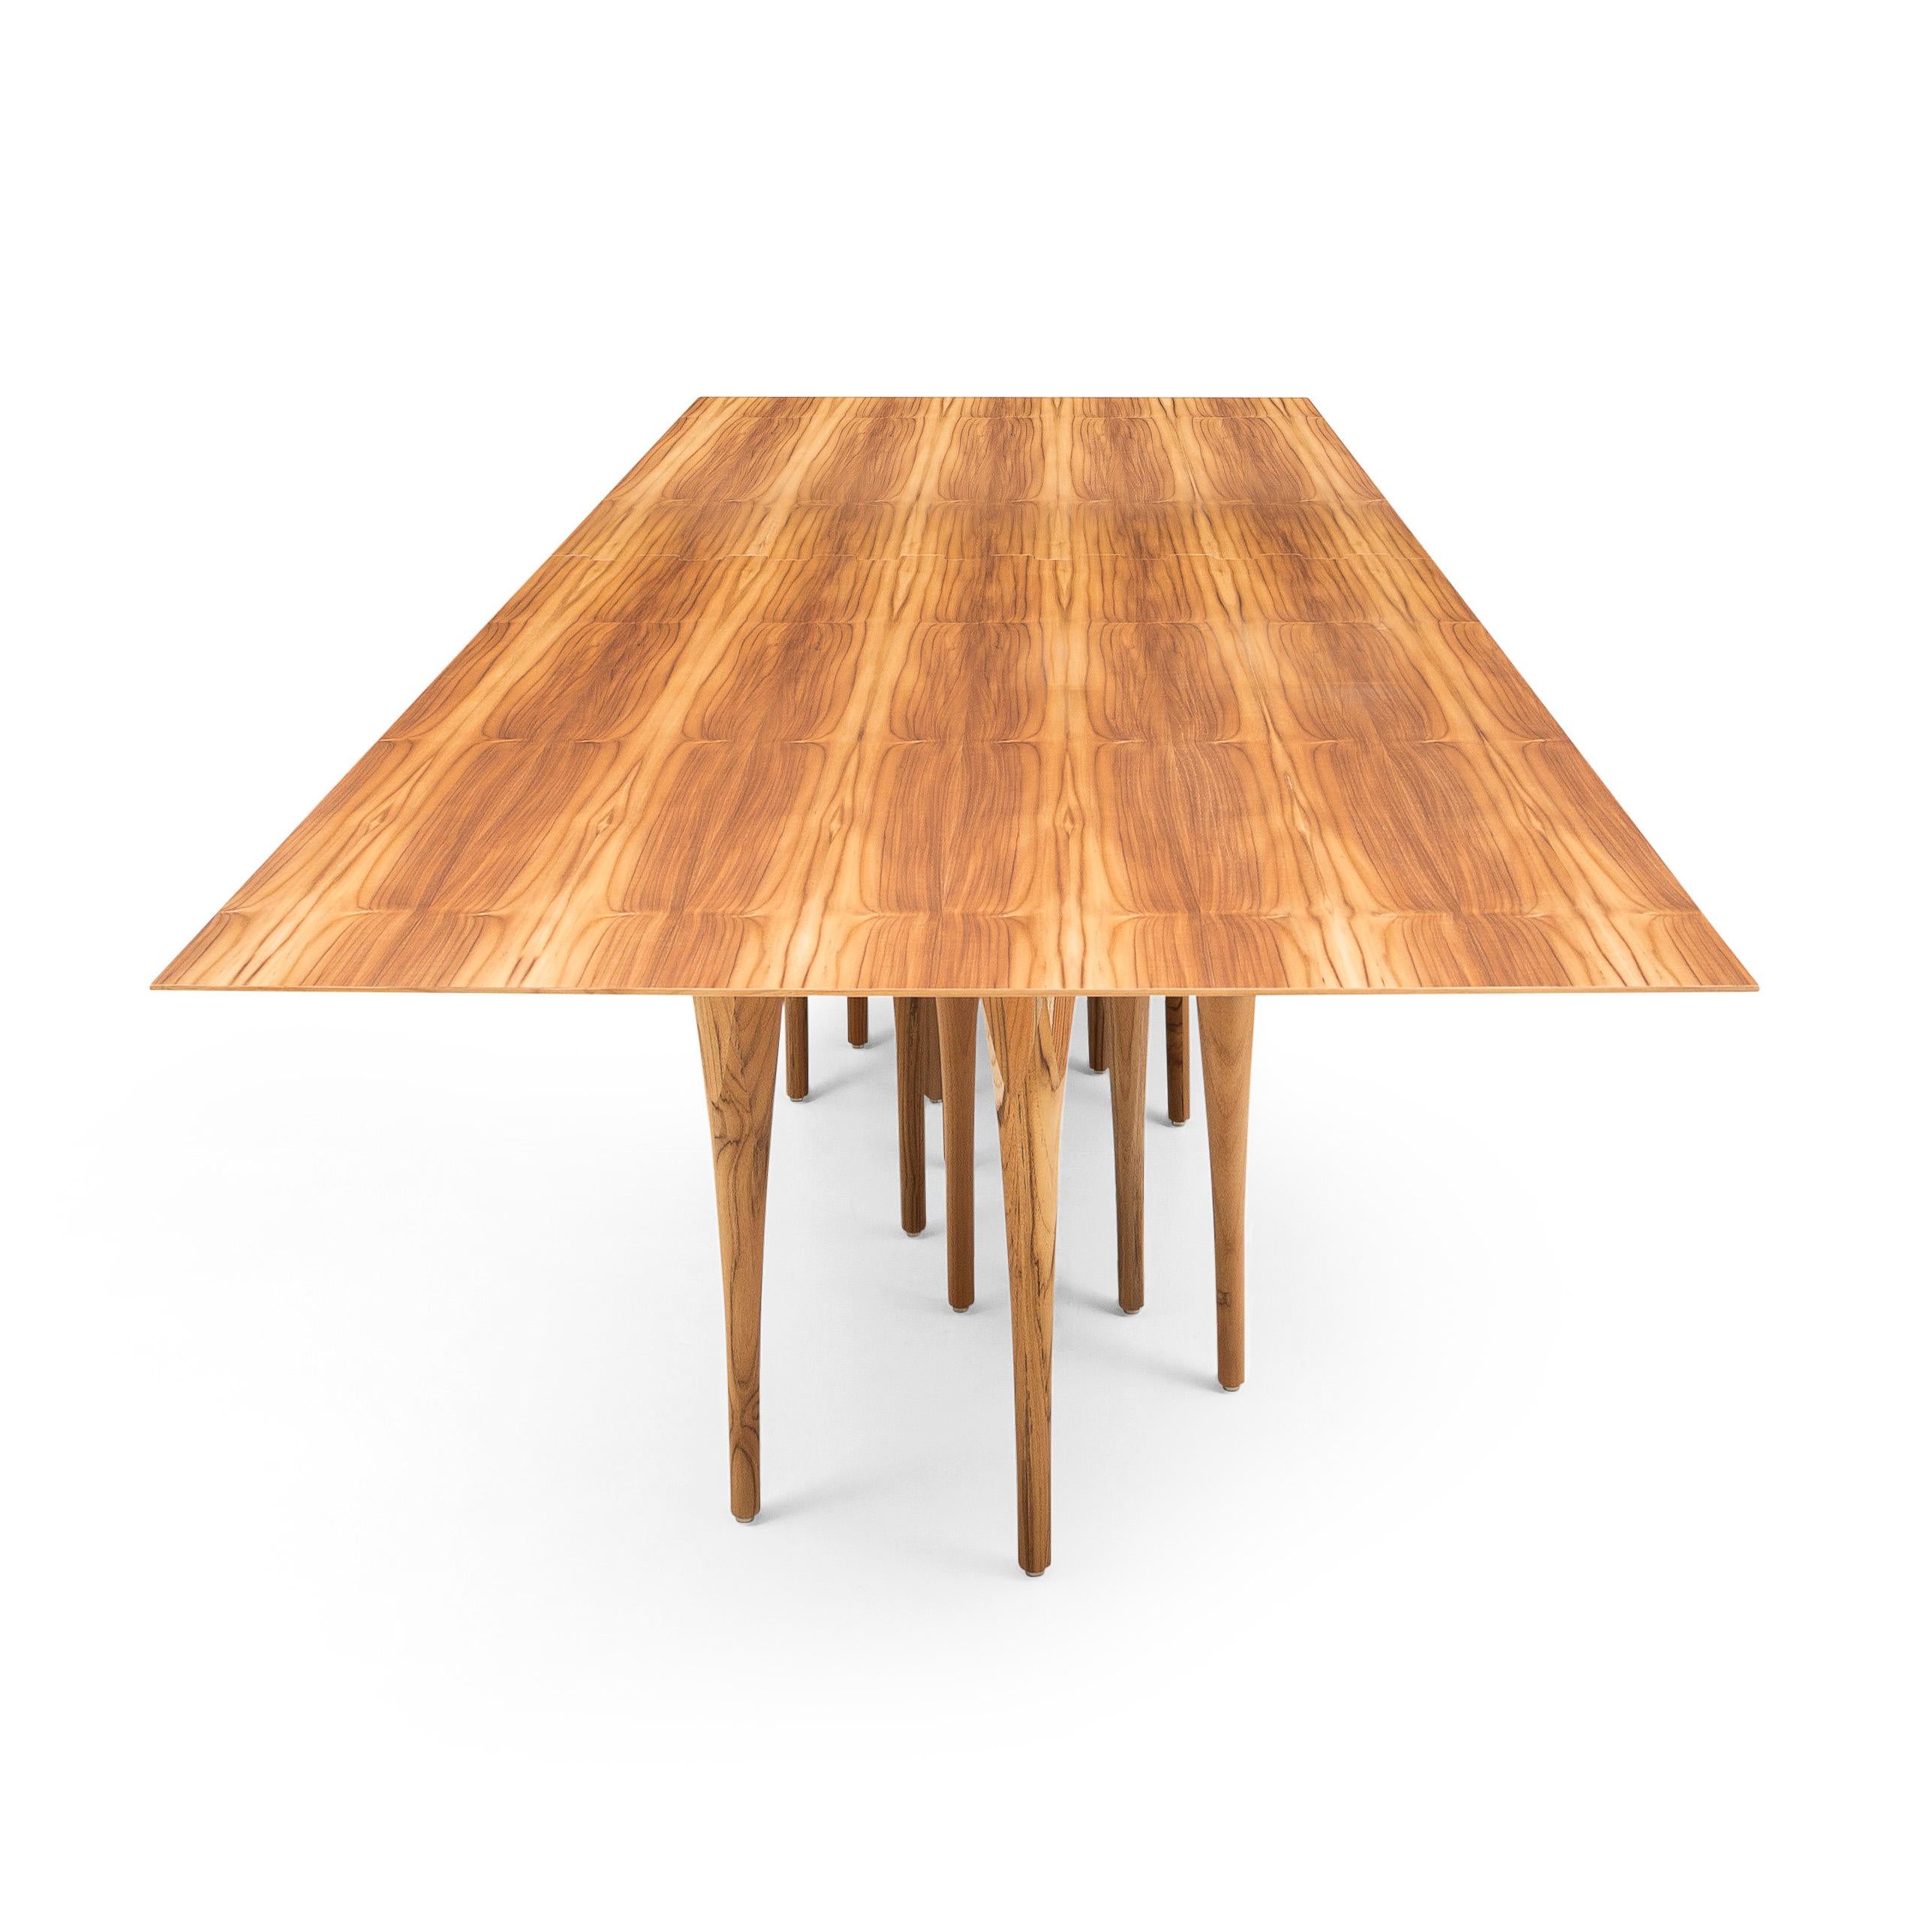 Contemporary Pin Dining Table with a Teak Wood Veneered Table Top and 16 Legs  118'' For Sale